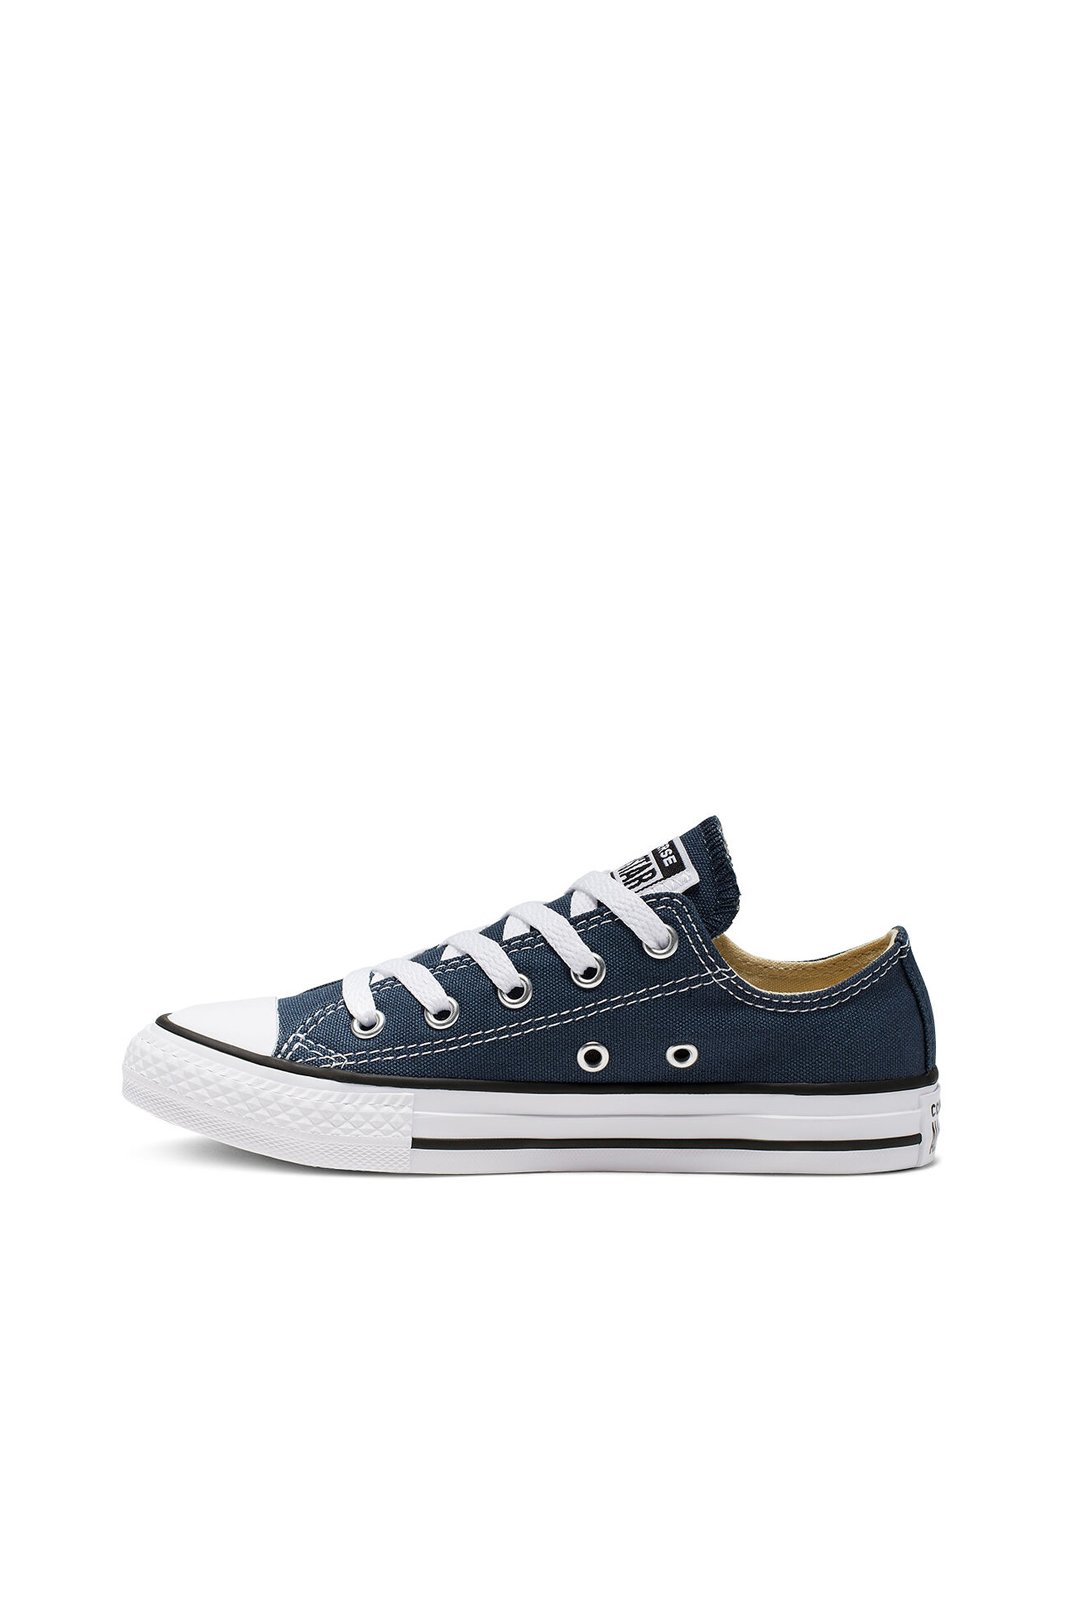 Chaussures  Converse 3J237 NAVY